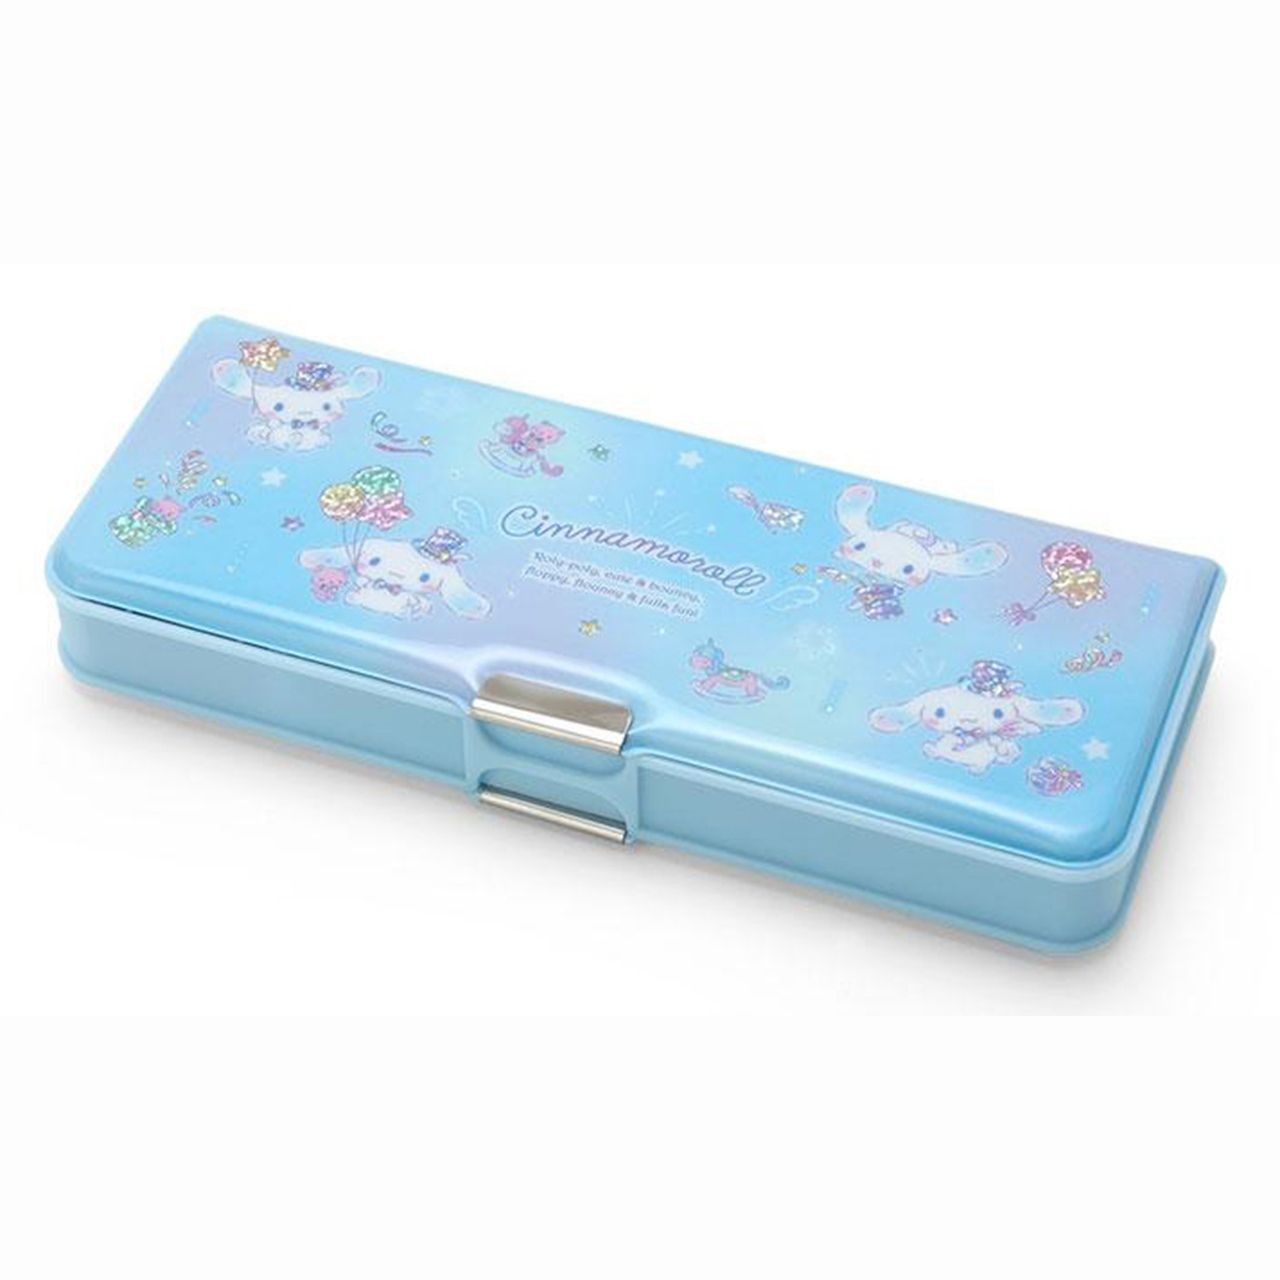 Sanrio Characters Double Compartment Pencil Case Hello Kitty